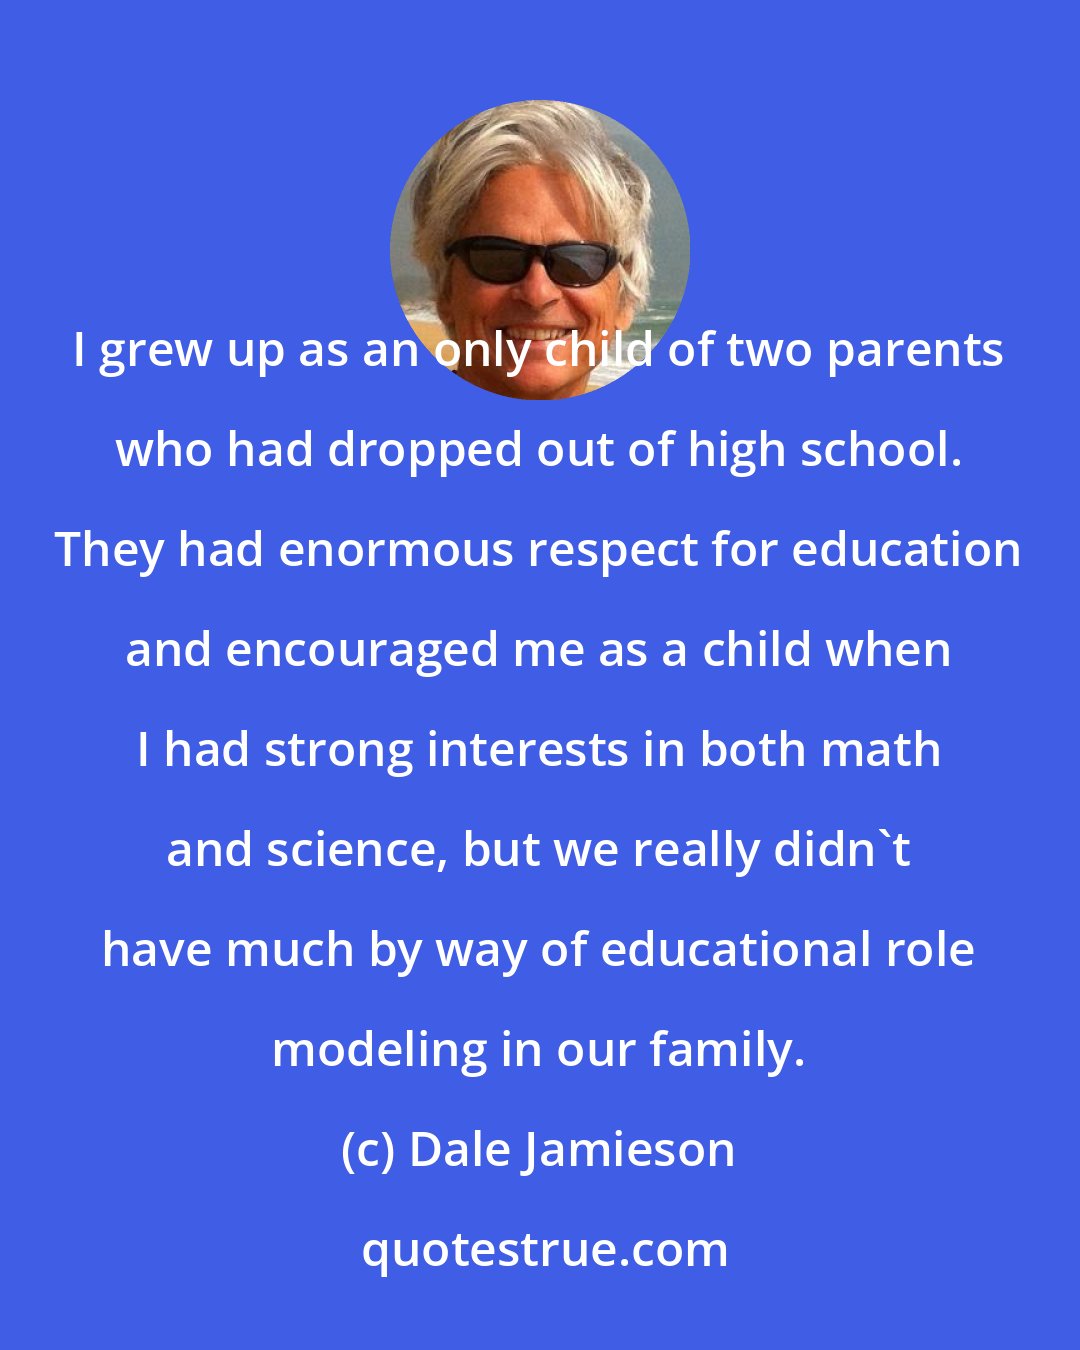 Dale Jamieson: I grew up as an only child of two parents who had dropped out of high school. They had enormous respect for education and encouraged me as a child when I had strong interests in both math and science, but we really didn't have much by way of educational role modeling in our family.